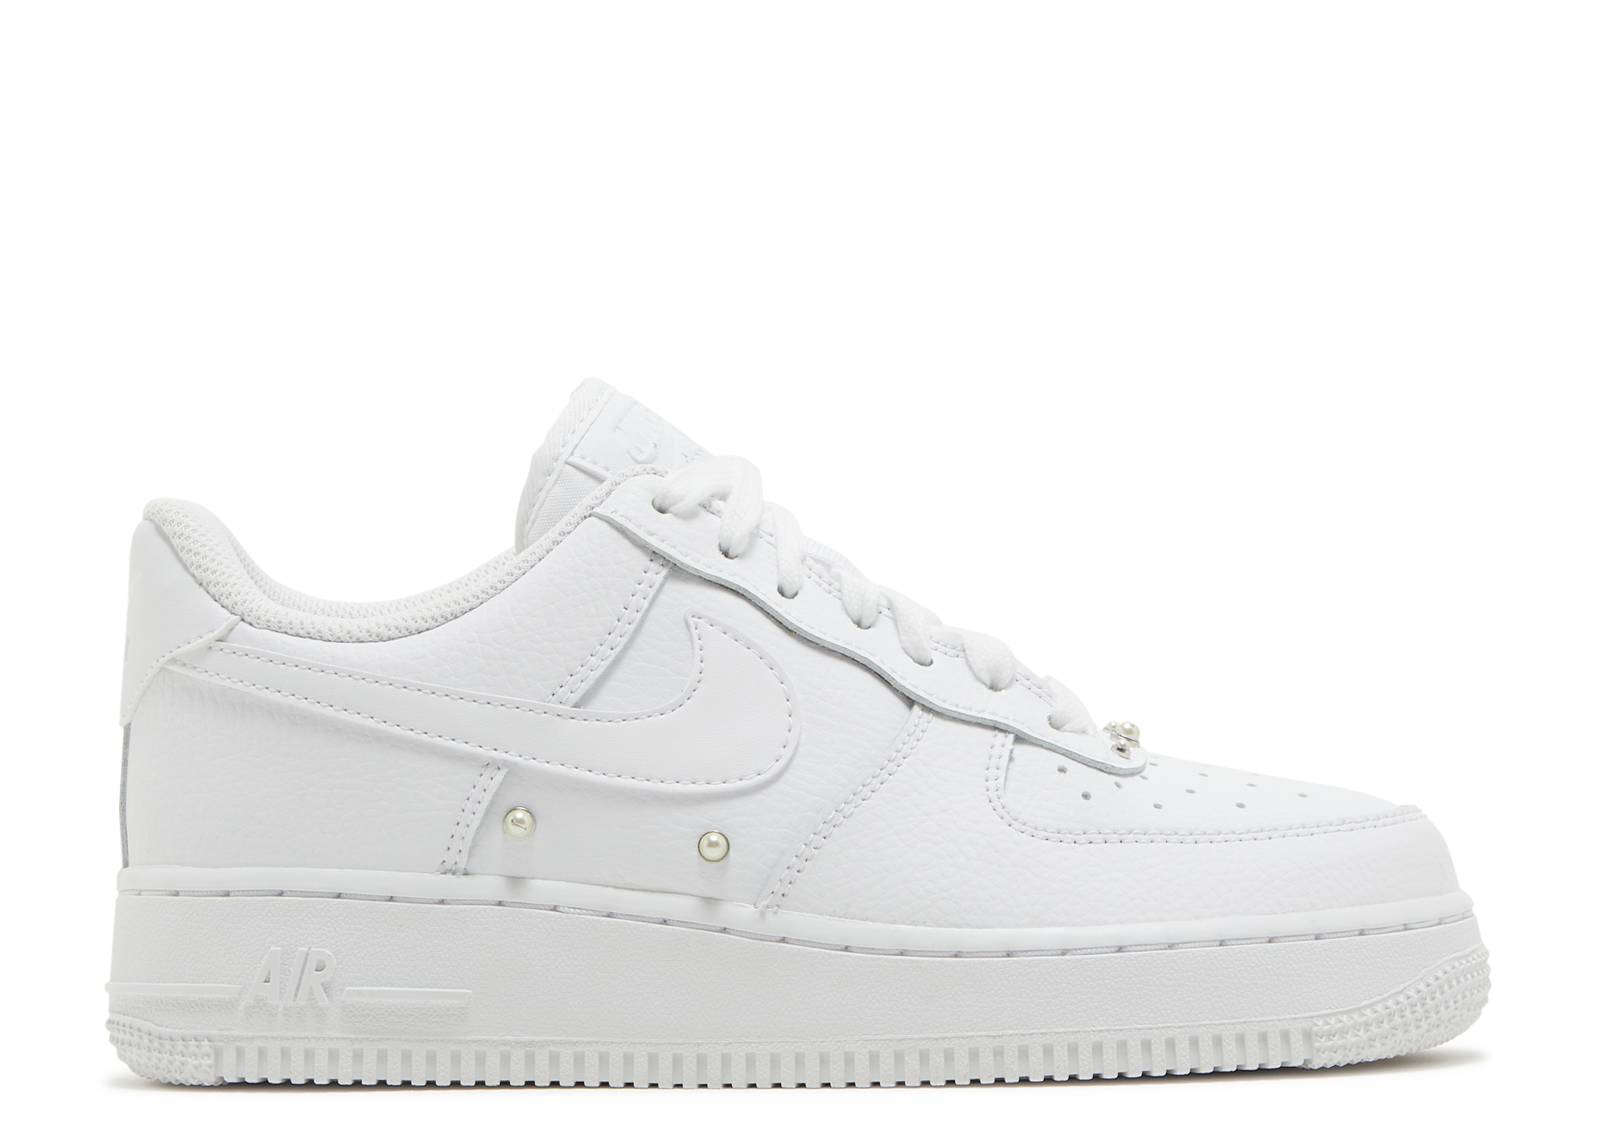 Wmns Air Force 1 Low '07 SE 'Pearl White'